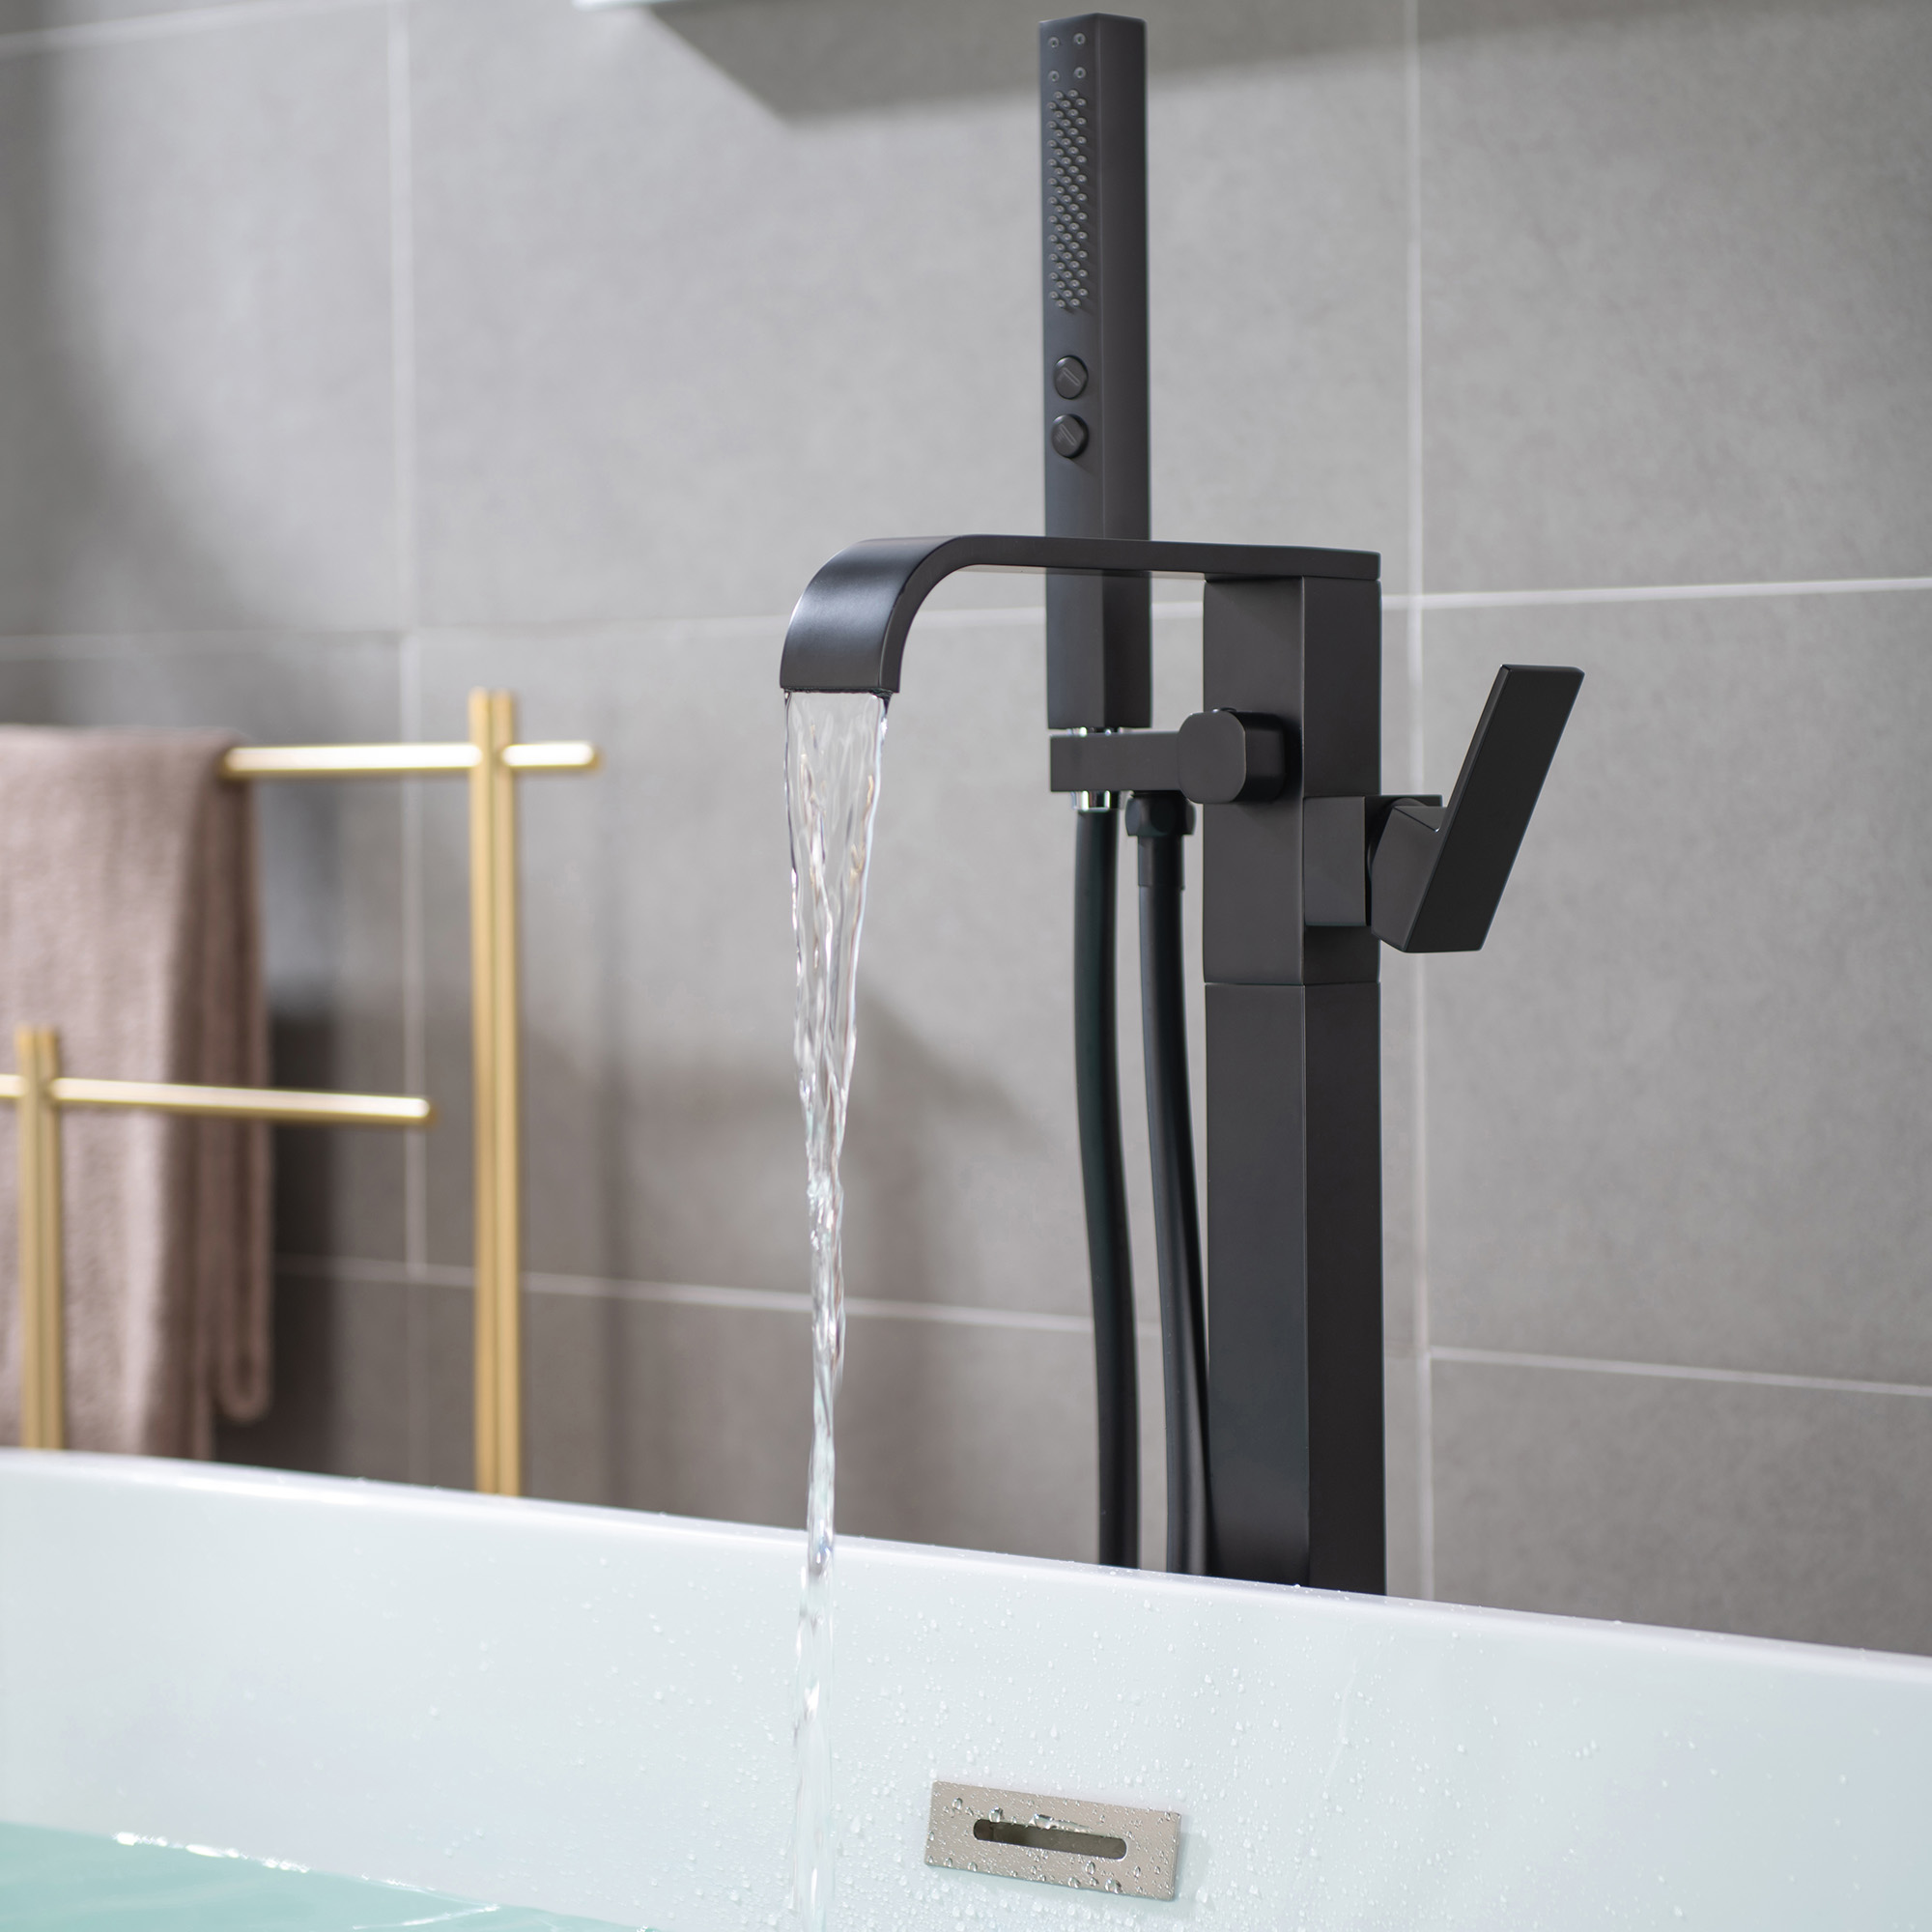  WOODBRIDGE F0037MB Contemporary Single Handle Floor Mount Freestanding Tub Filler Faucet with Hand shower in Matte Black Finish._12236